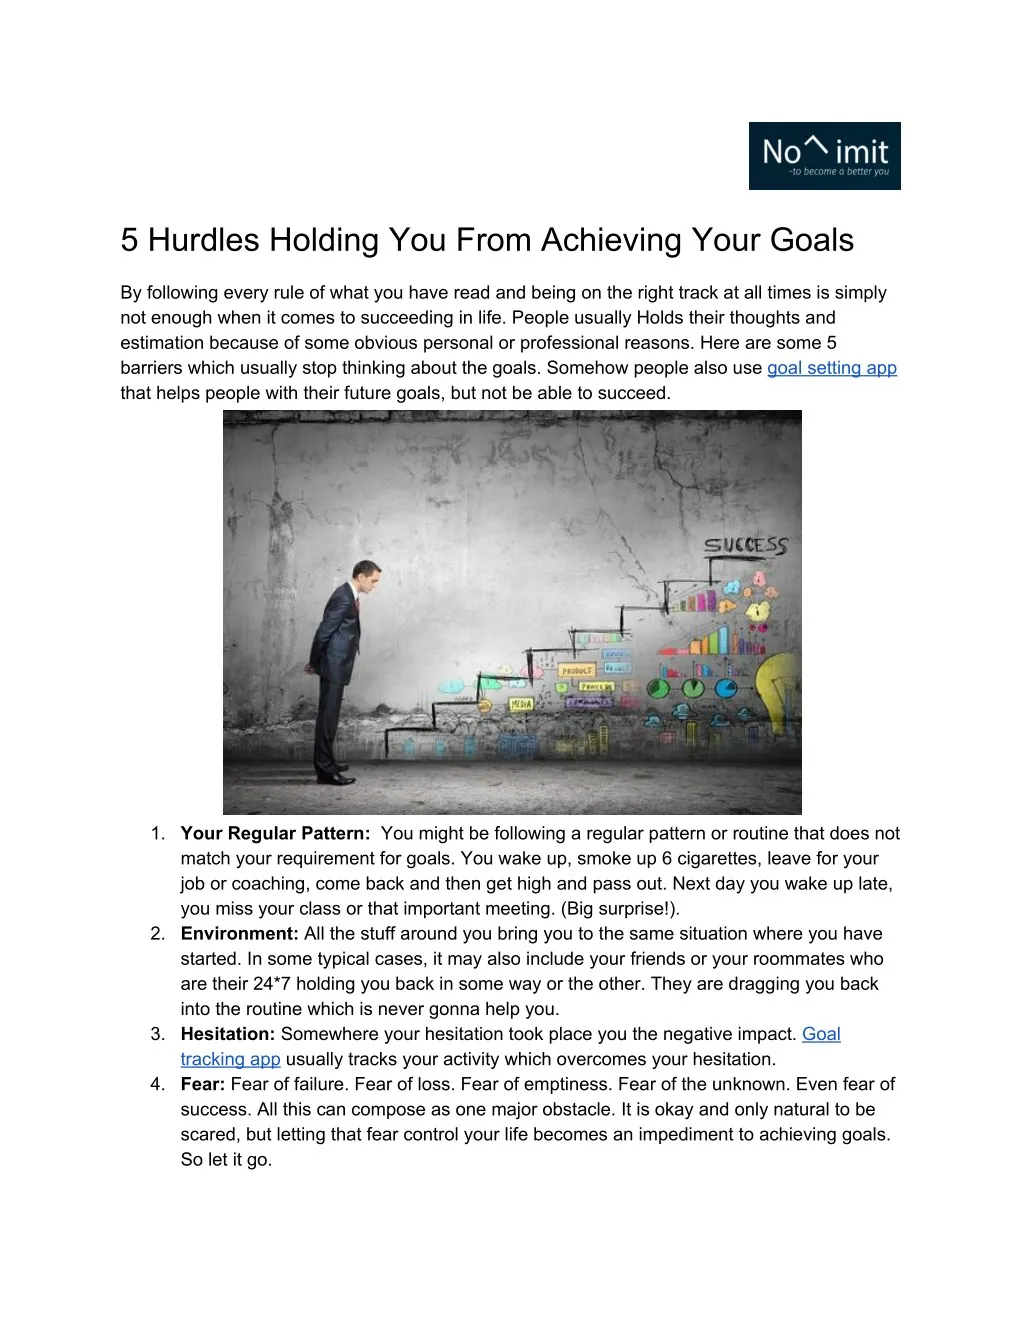 5 hurdles holding you from achieving your goals